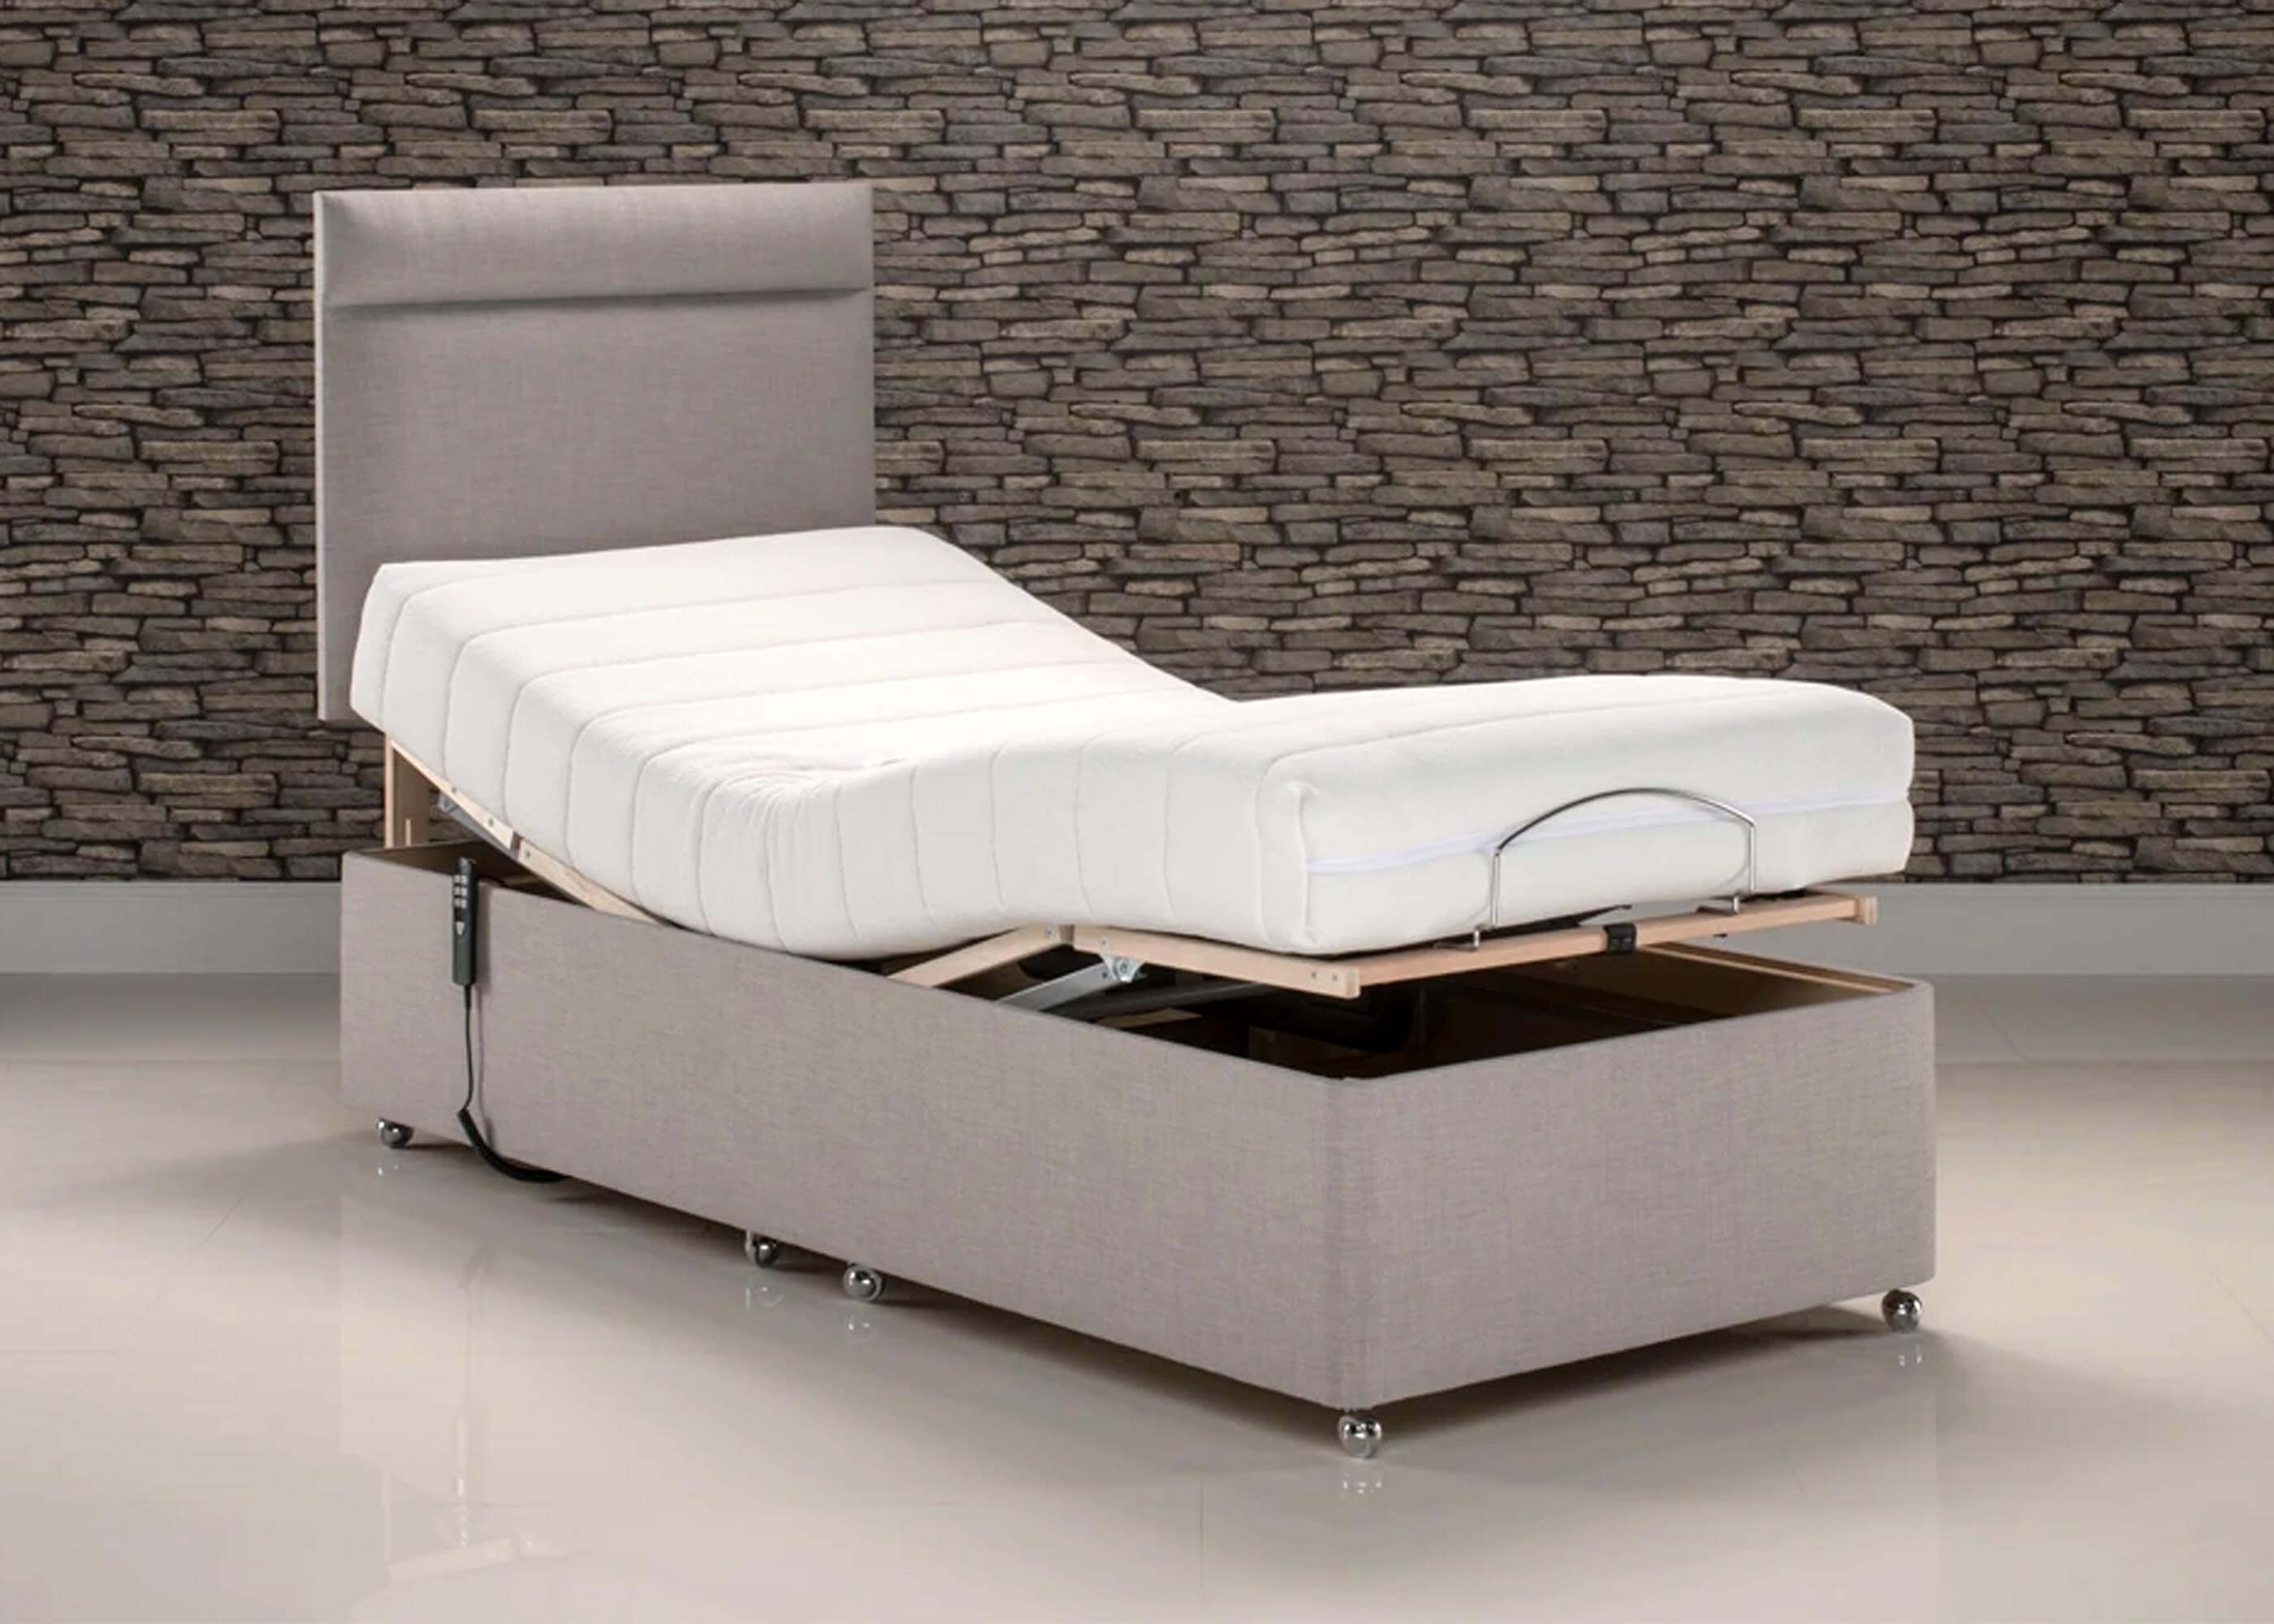 weight of bed with frame and mattress